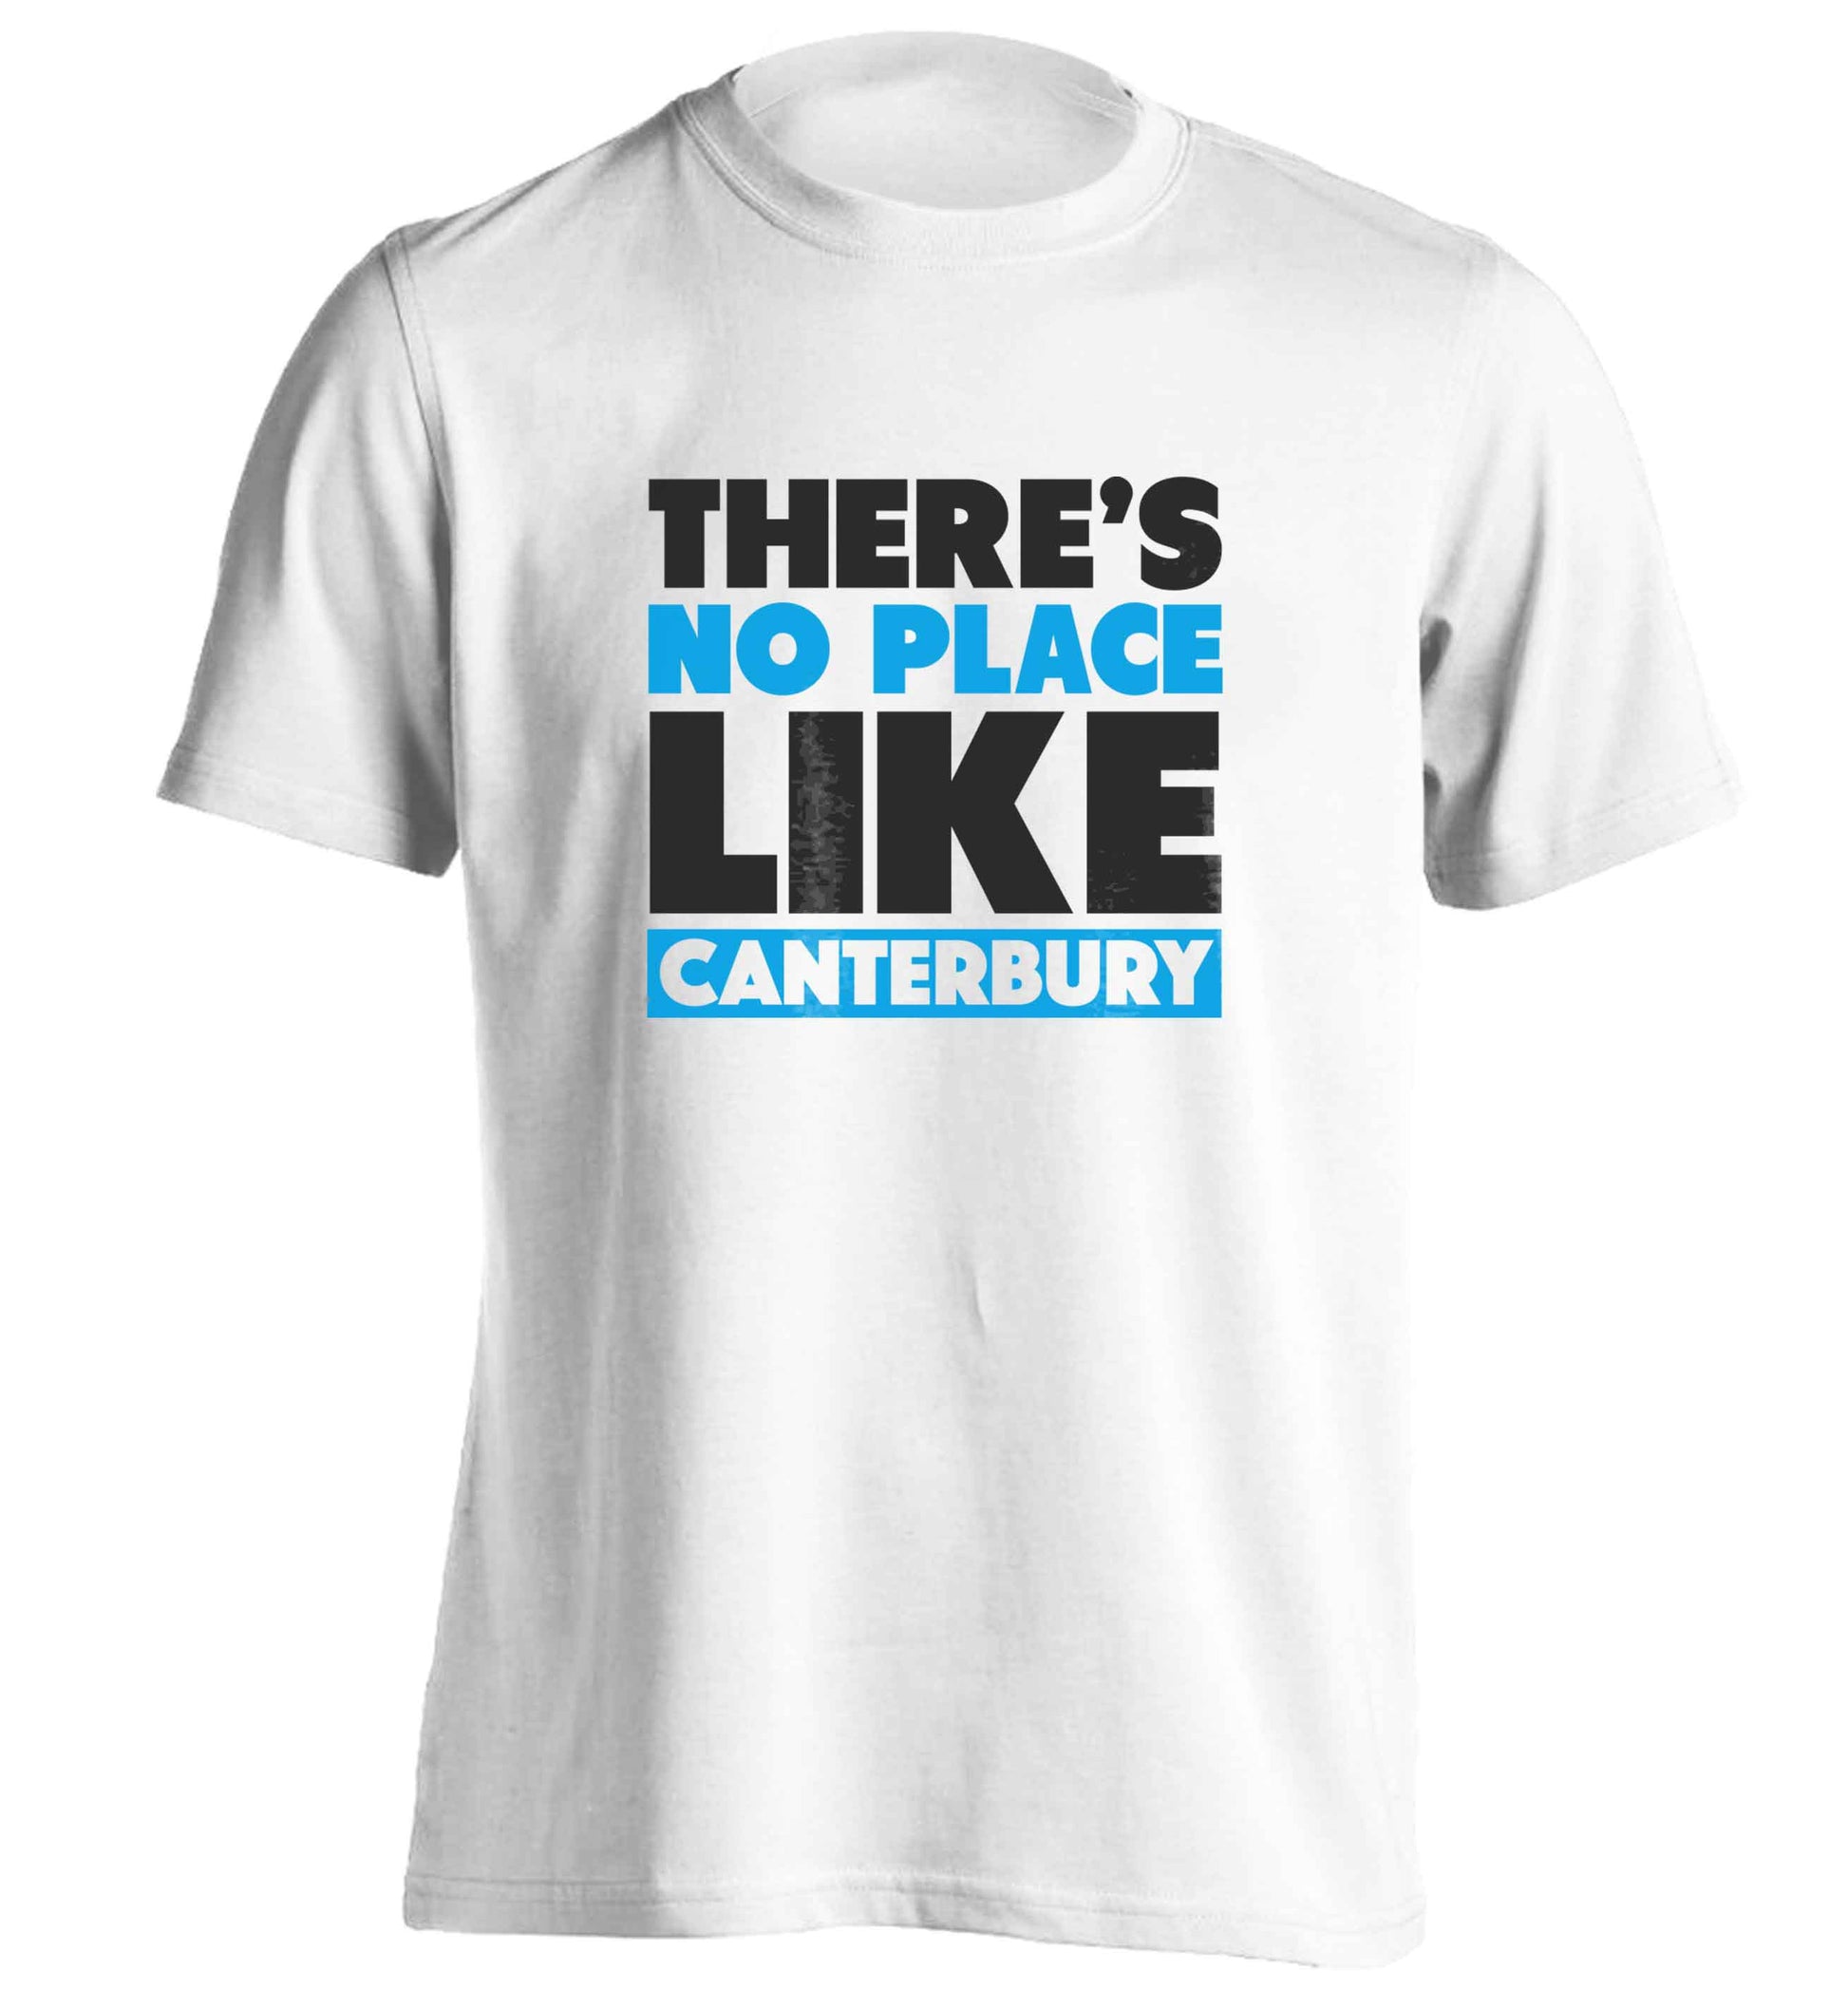 There's no place like Canterbury adults unisex white Tshirt 2XL